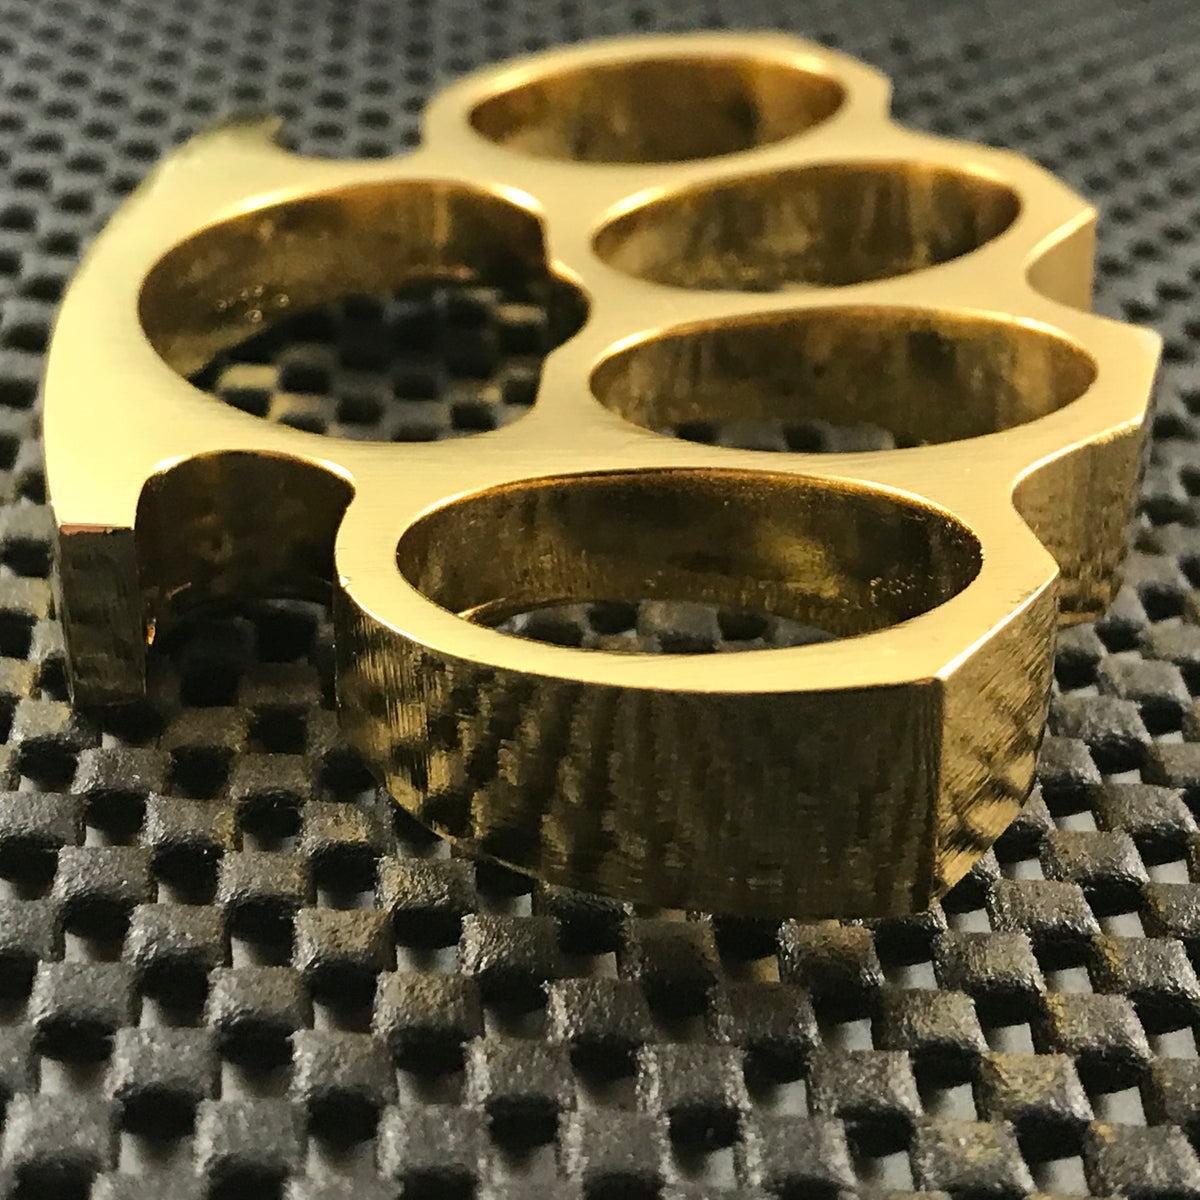 Pin on Engraved brass knuckle